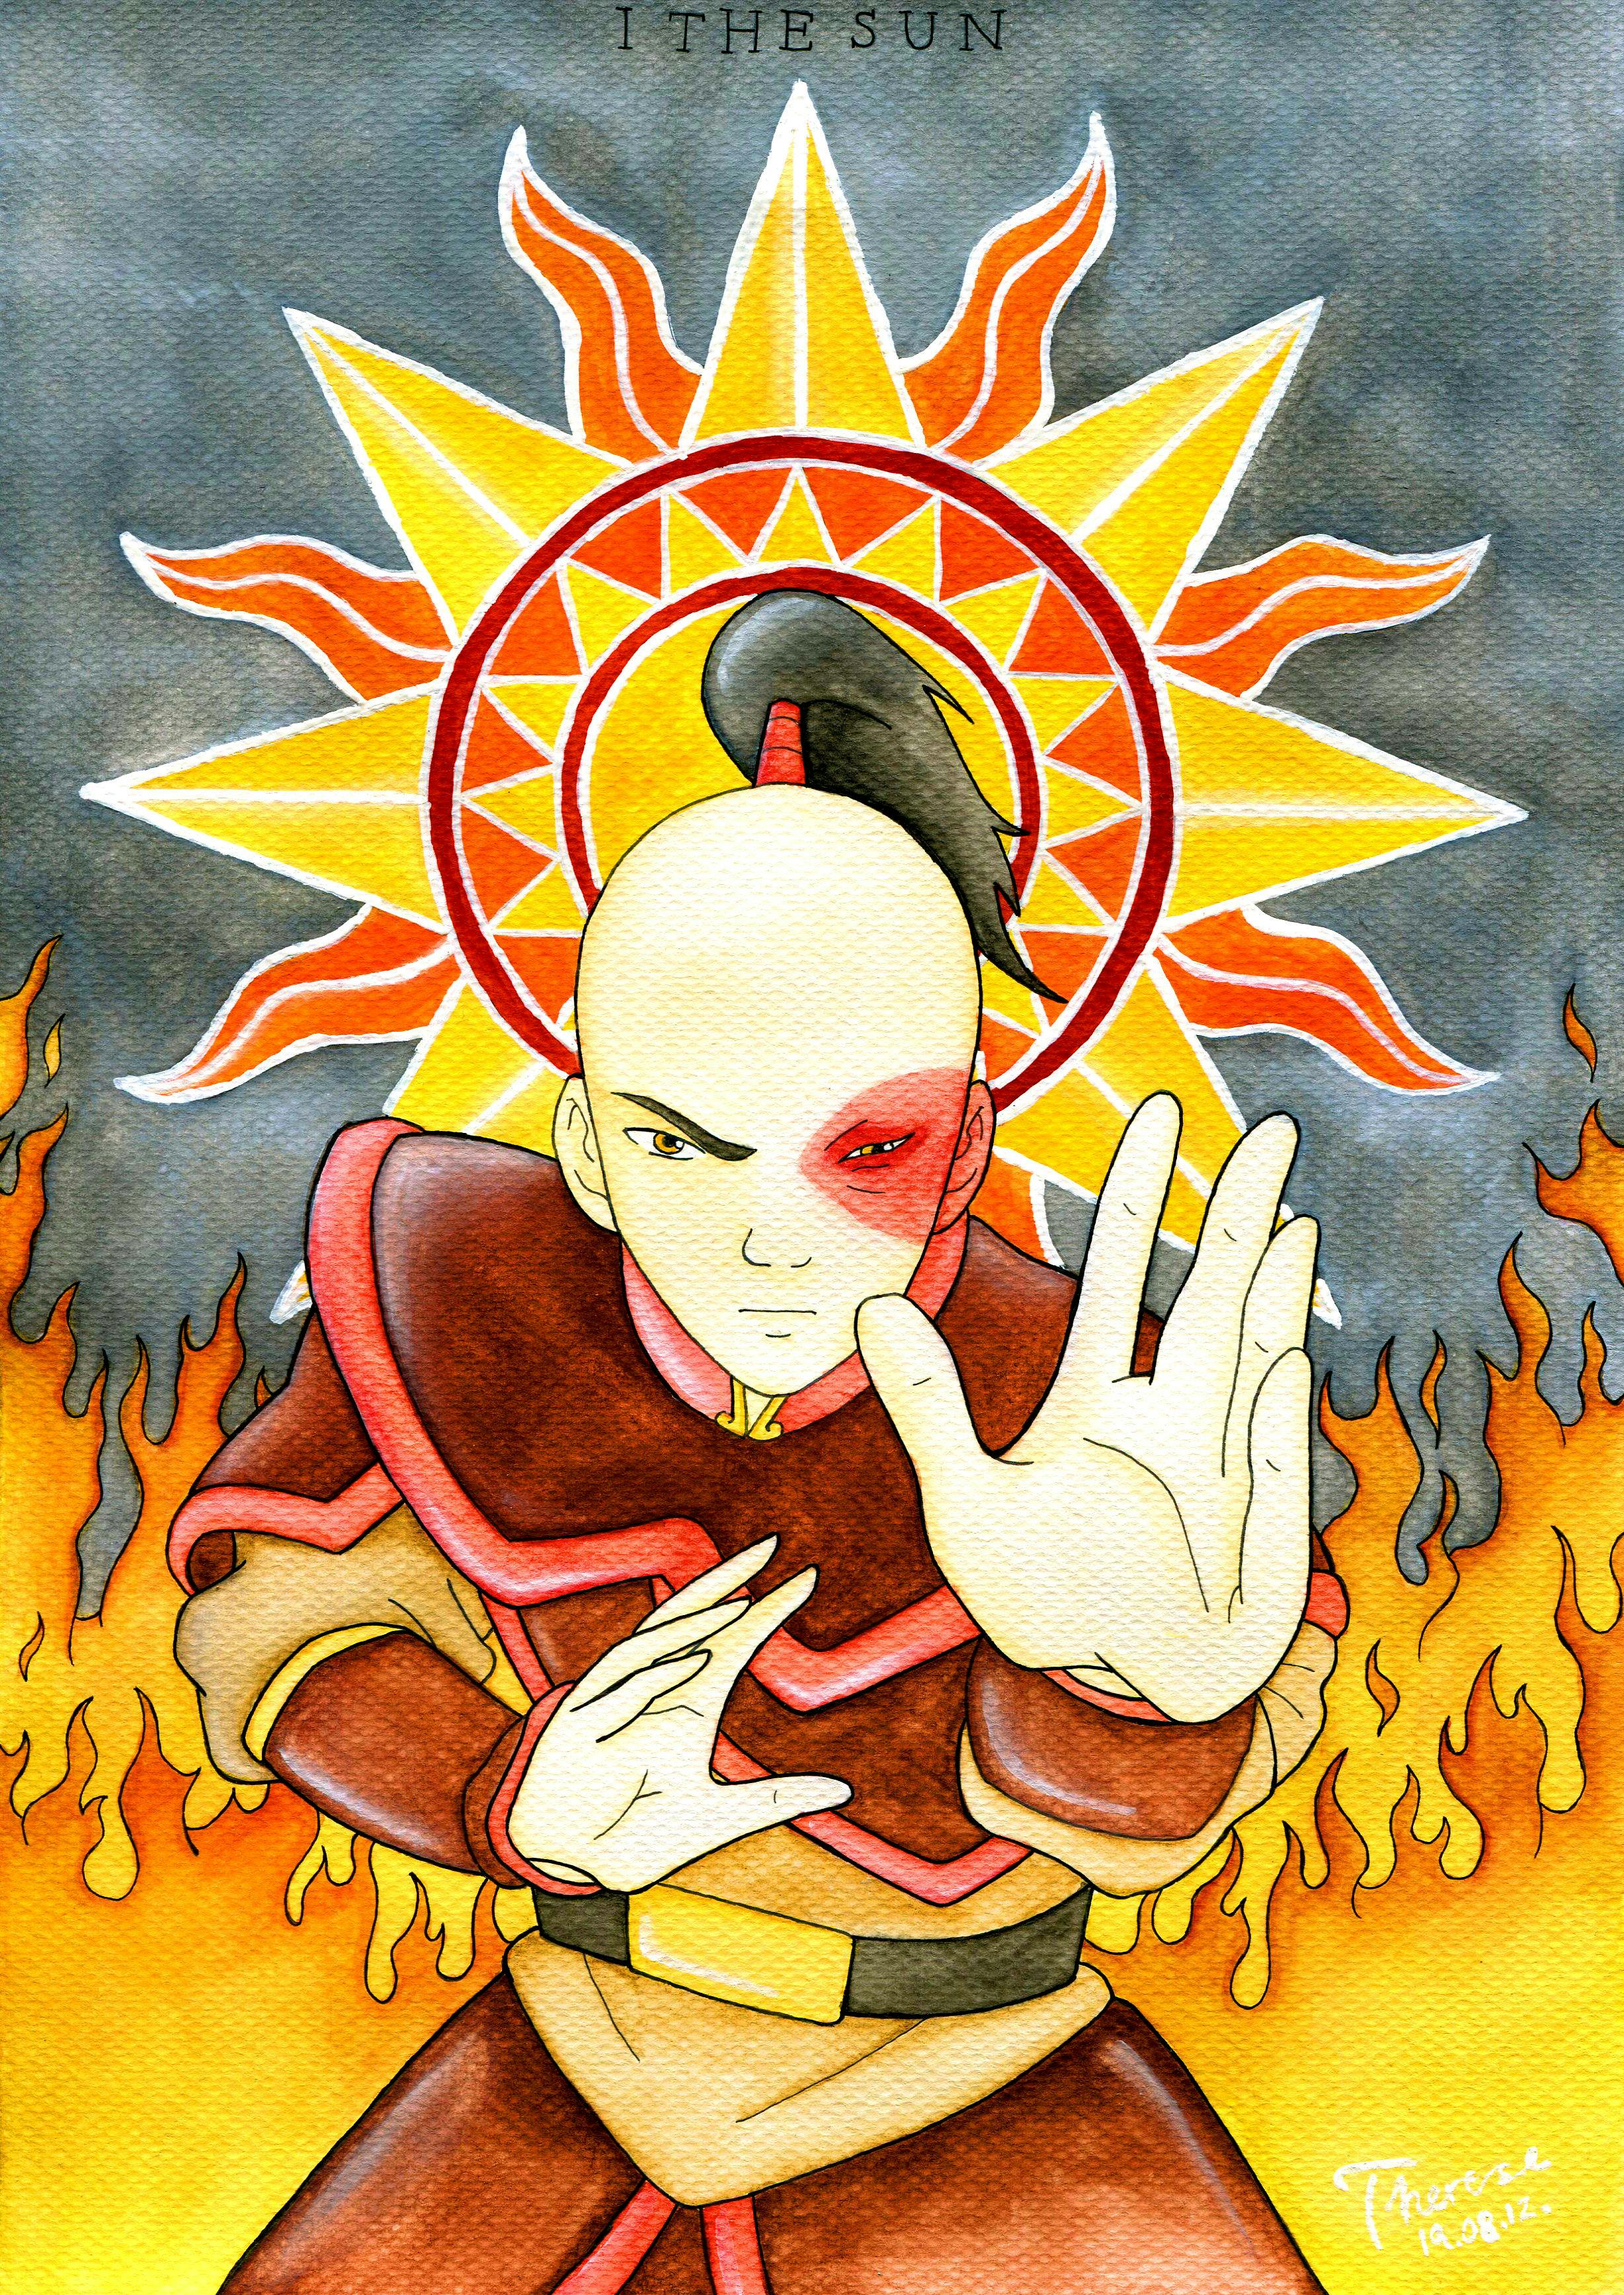 The character Zuko from Avatar: the Last Airbender as the major arcana card The Sun